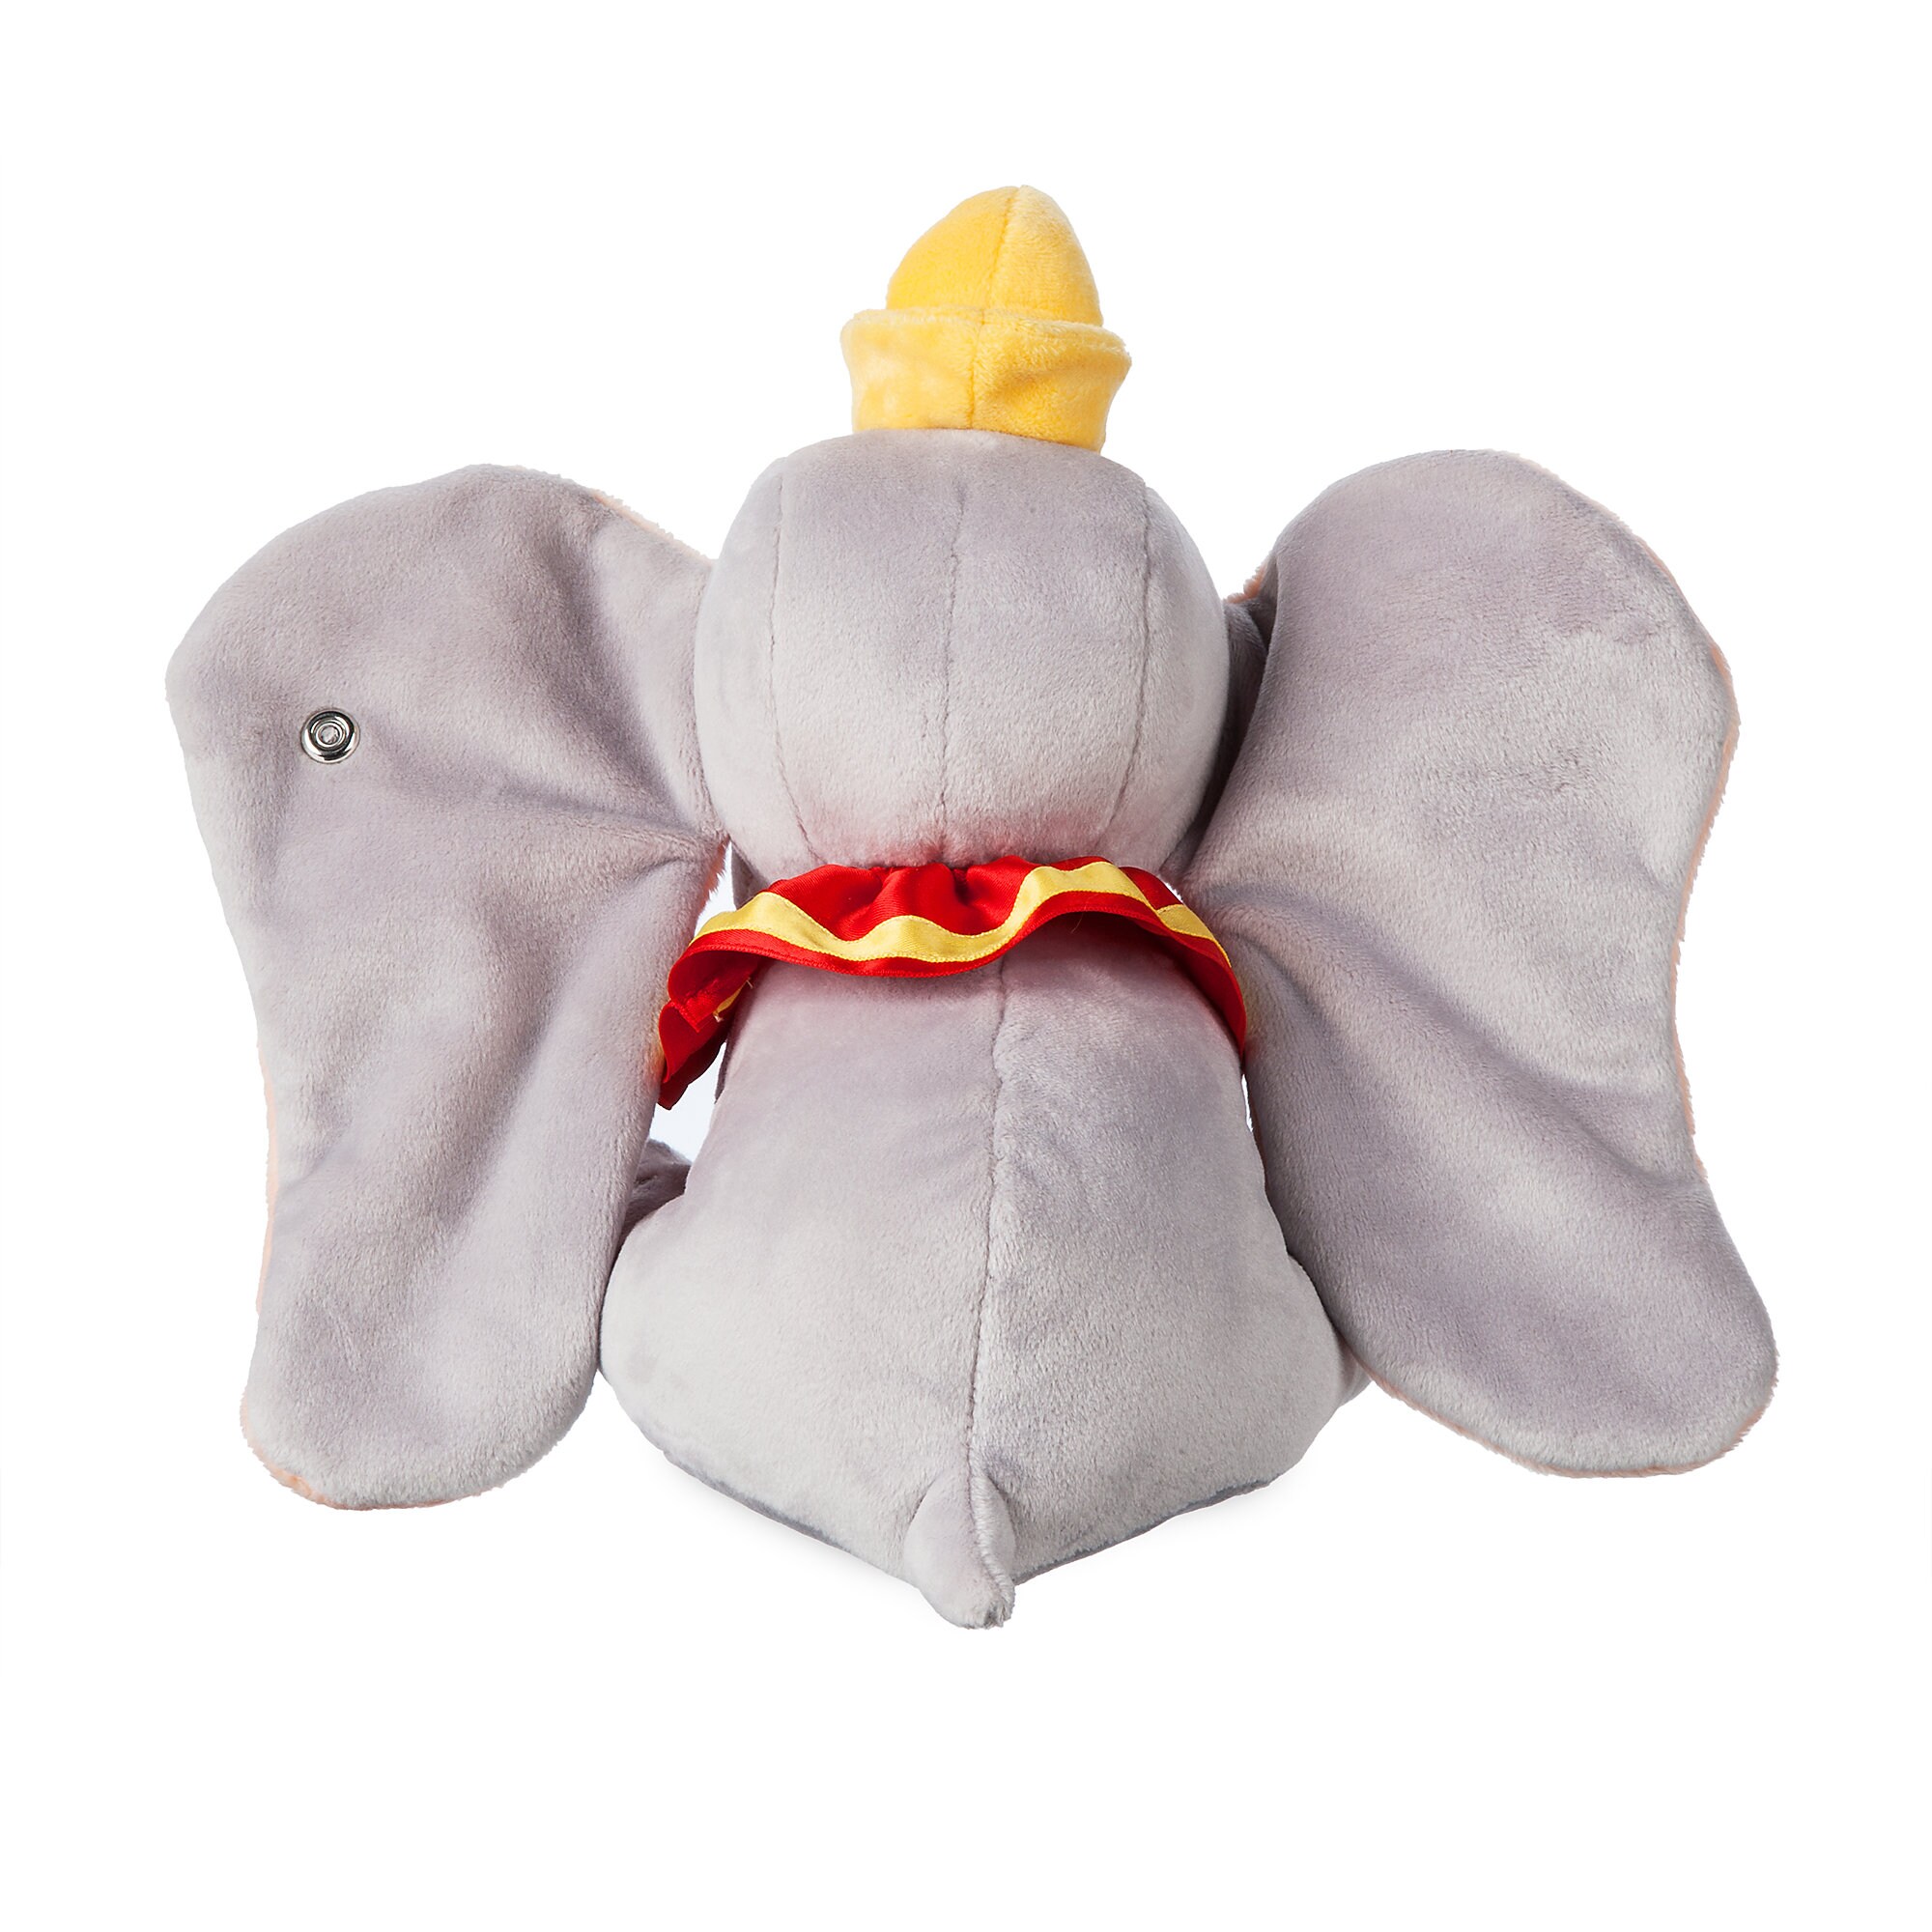 Dumbo Collectible Plush by Steiff - 9'' - Limited Release